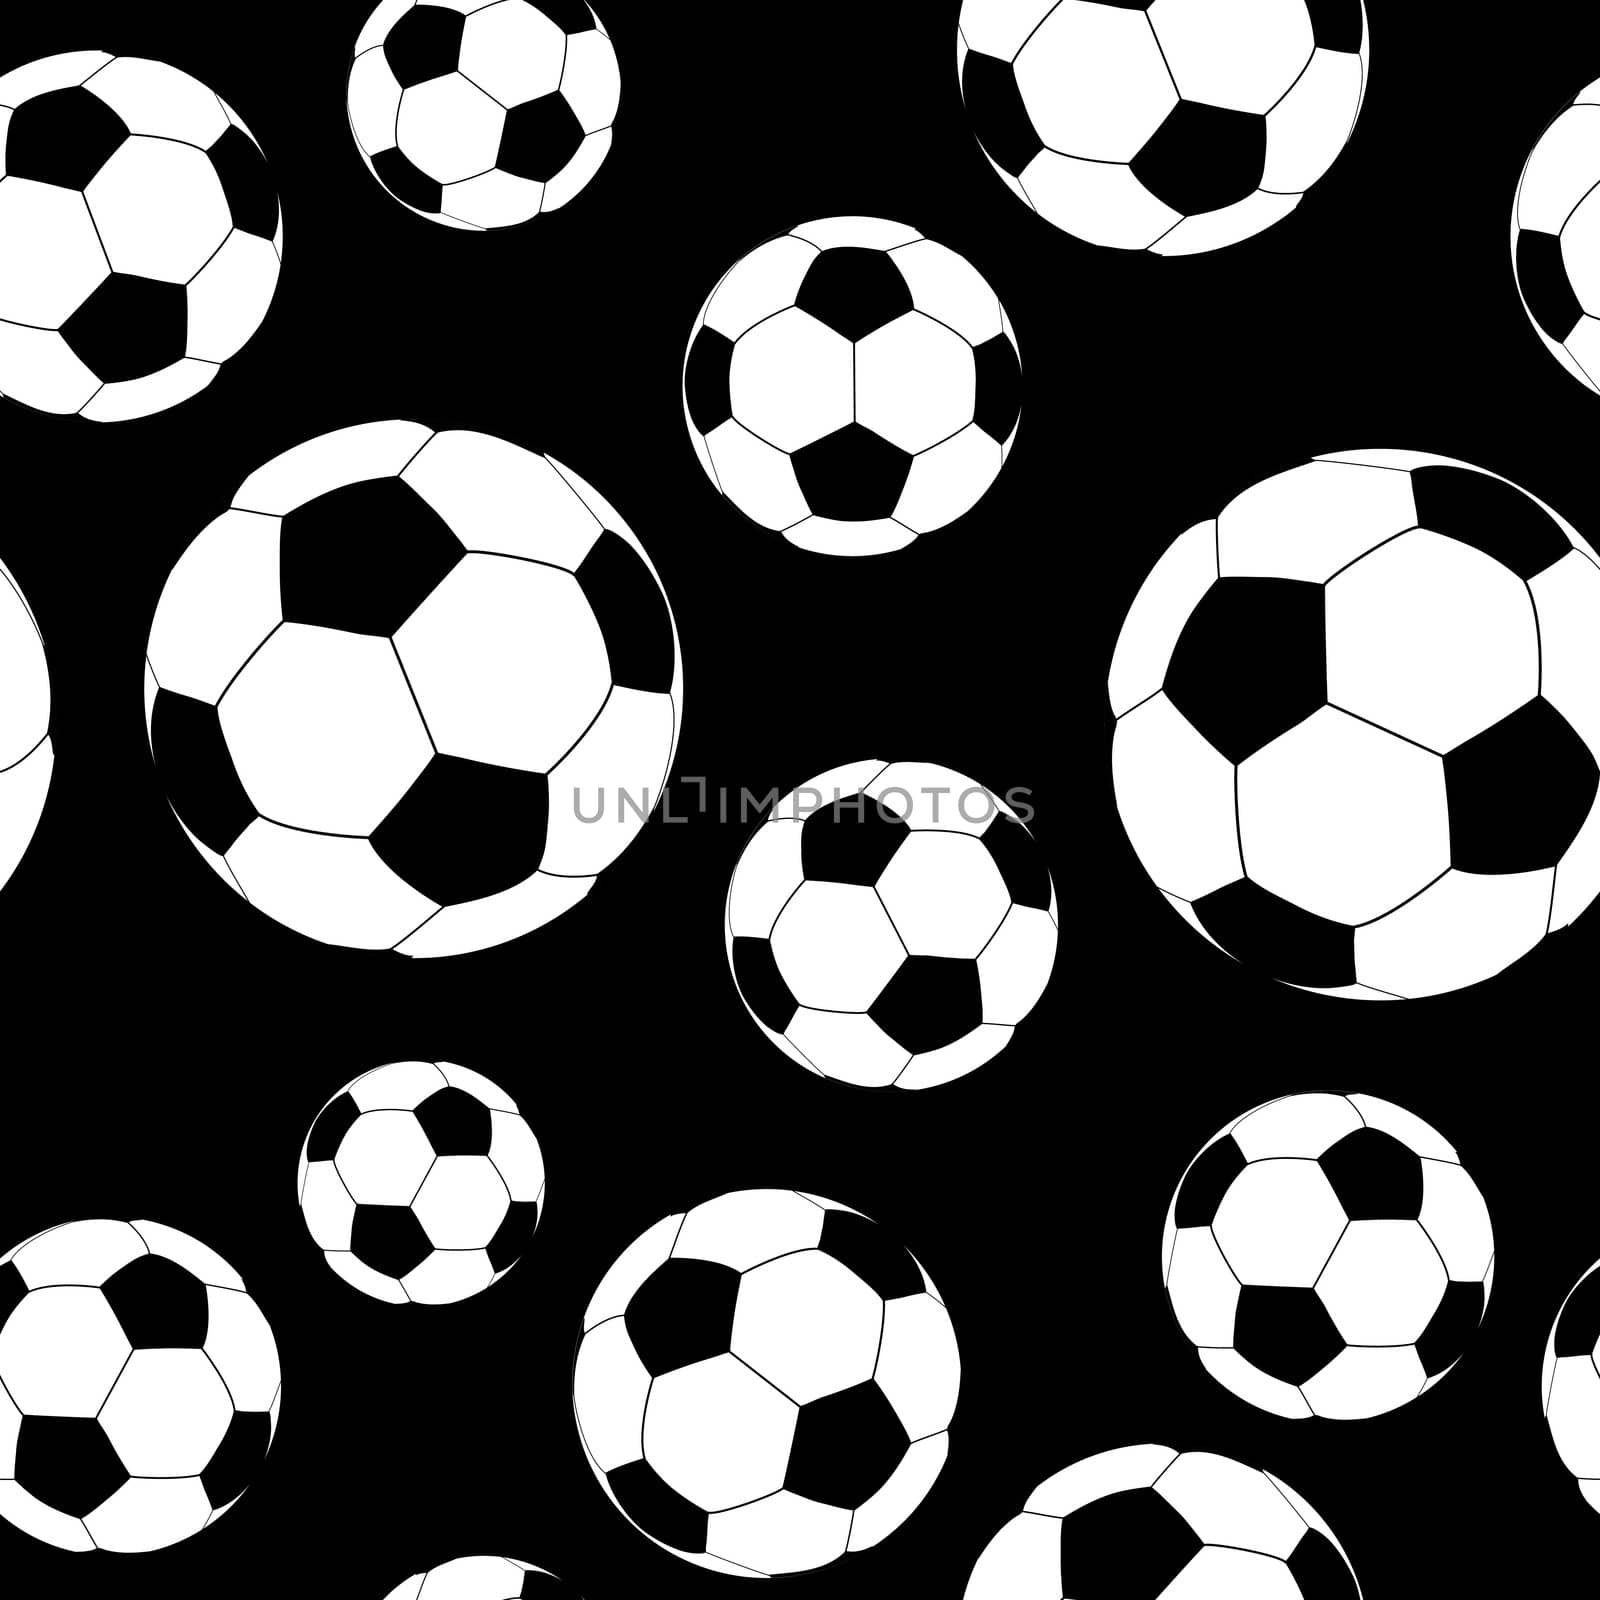 Traditional black and white soccer or football with seamless background